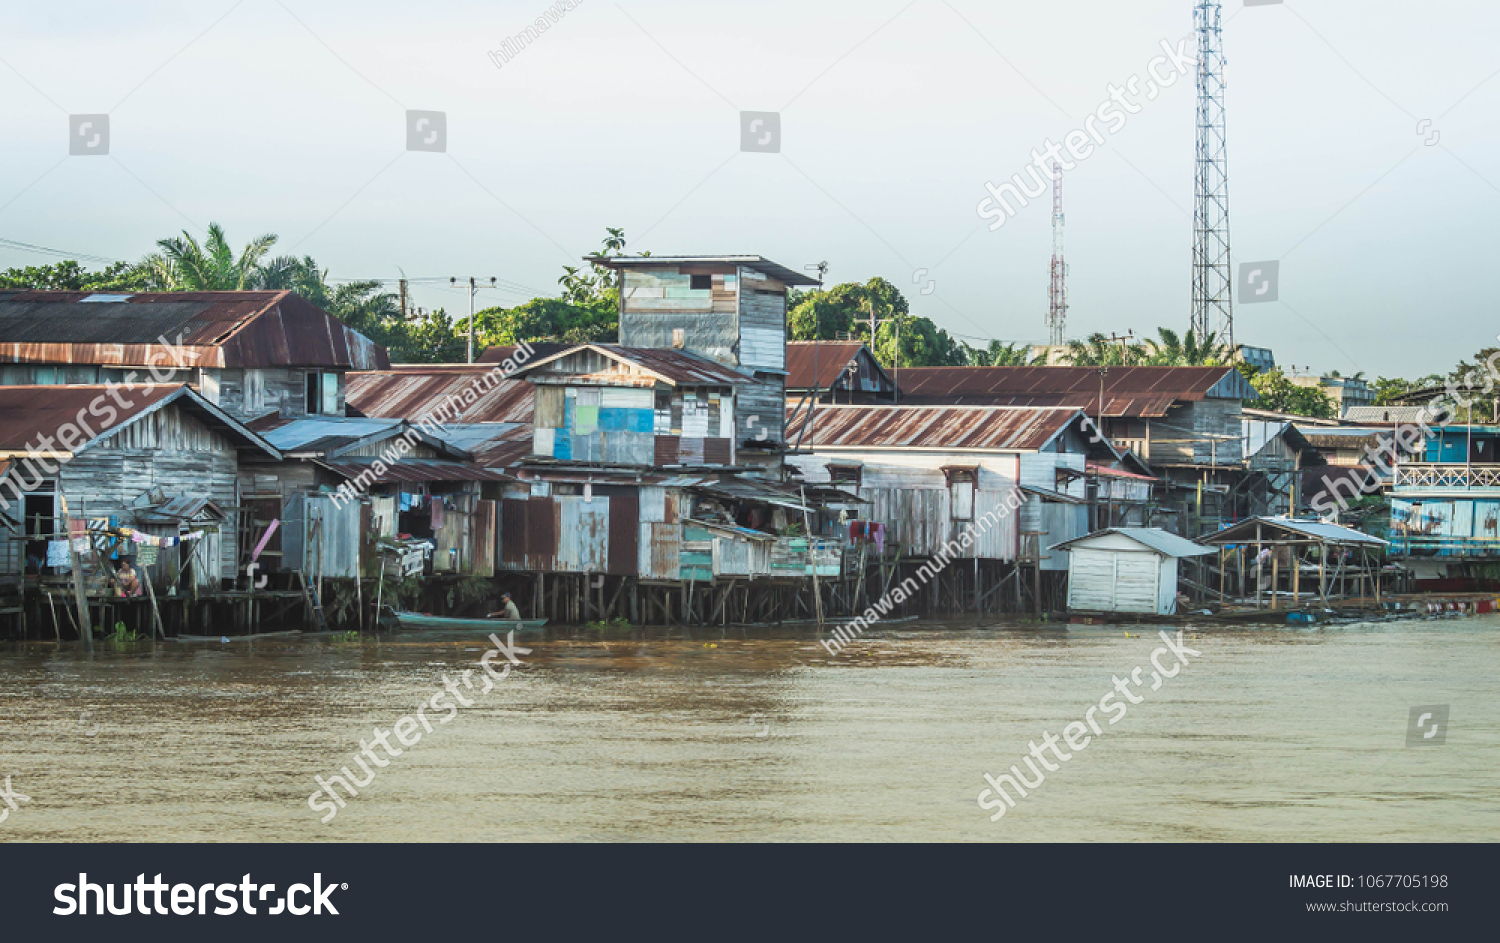 wooden house on the riverbank. slum area over the river. poverty and social problem concept #1067705198